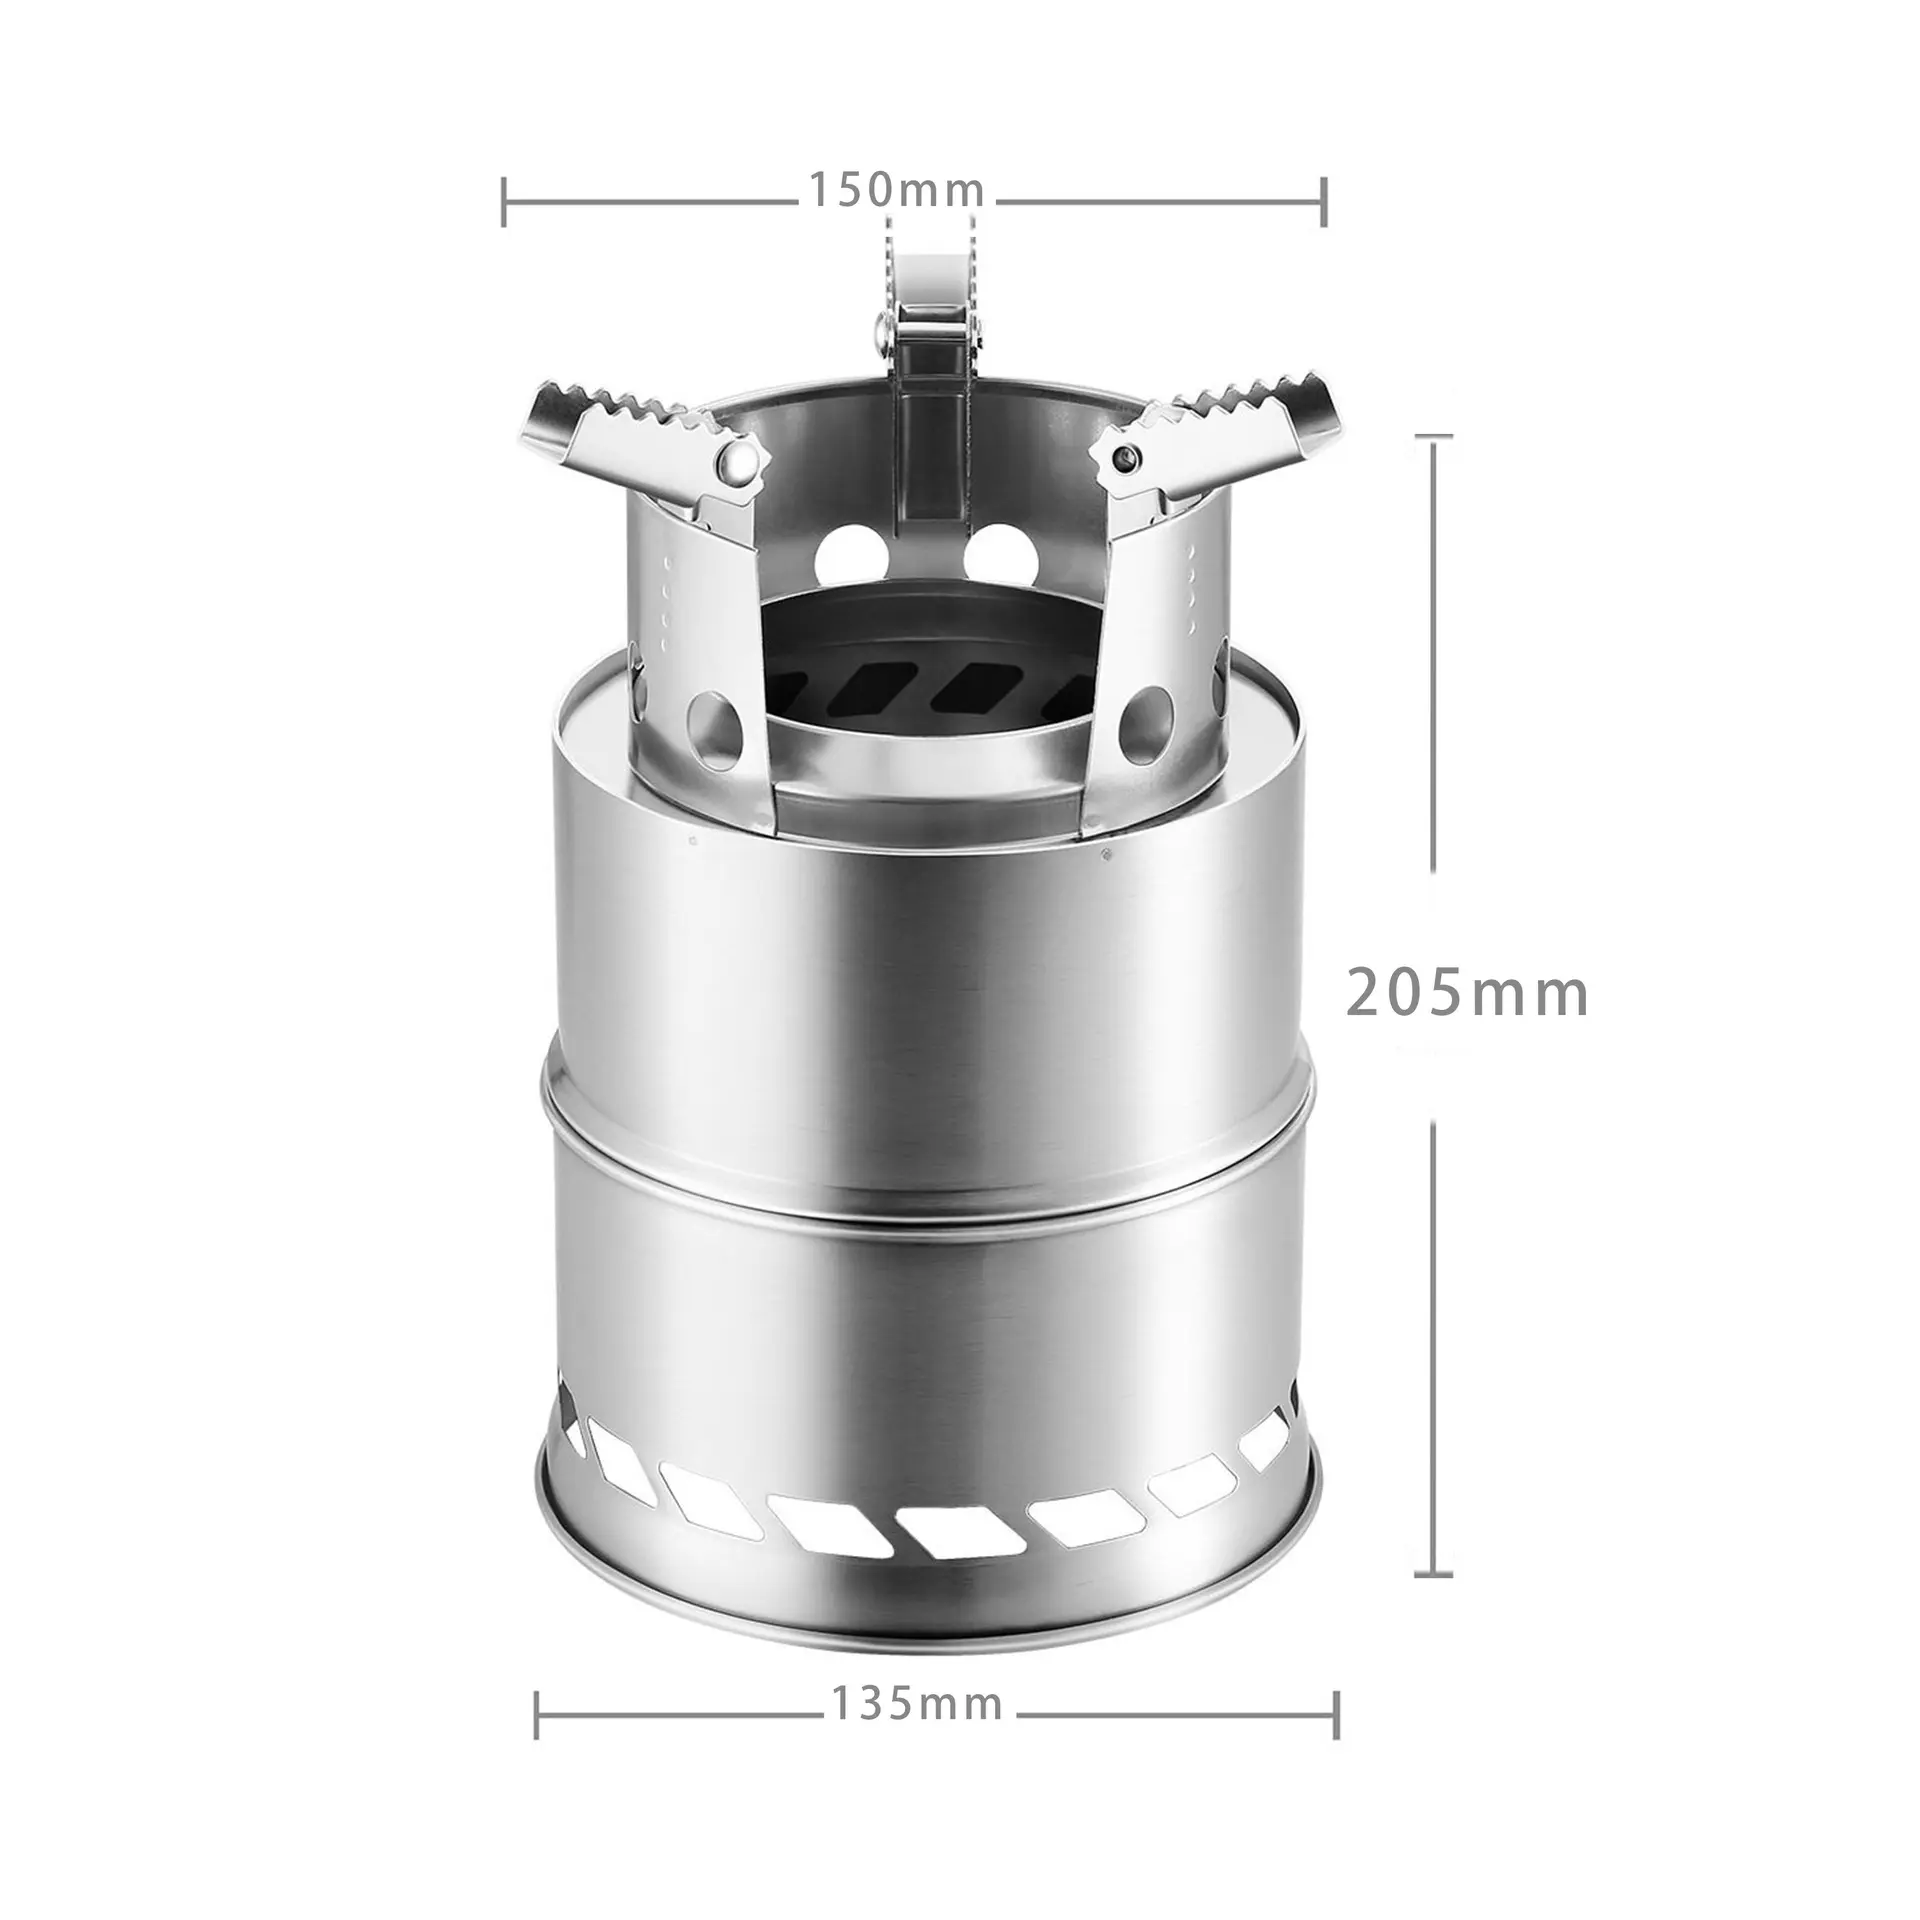 Camping Stainless Steel Backpacking Stove Portable Wood Burning Stoves For Picnic BBQ Camp Hiking